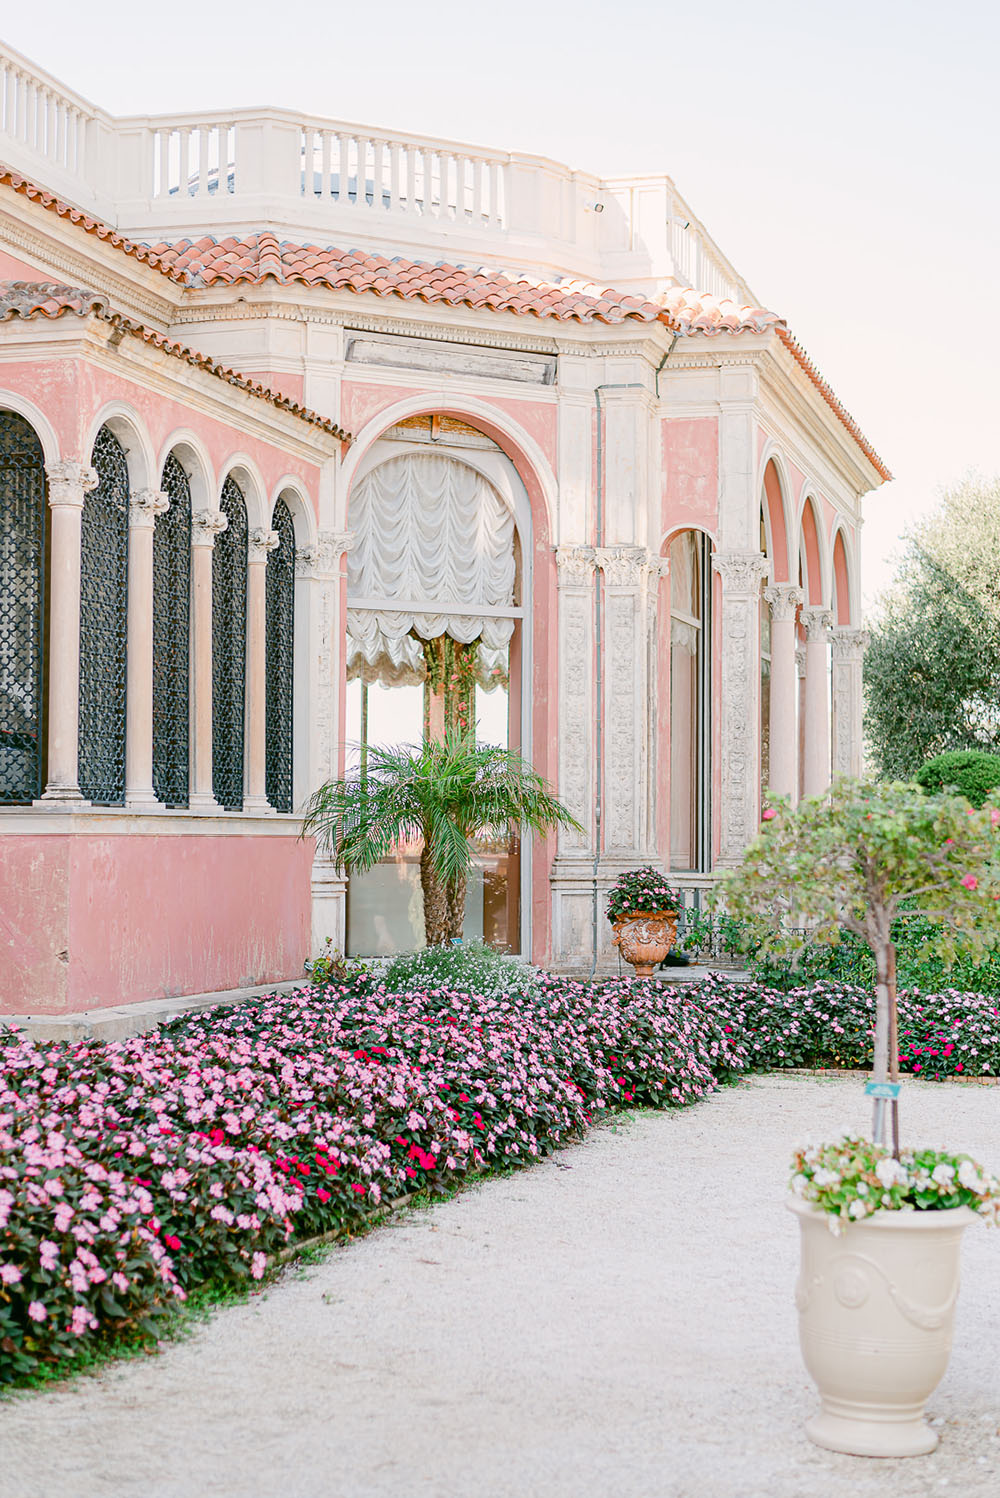 Pink and cream exterior of Villa Ephrussi de Rothschild in the French Riviera